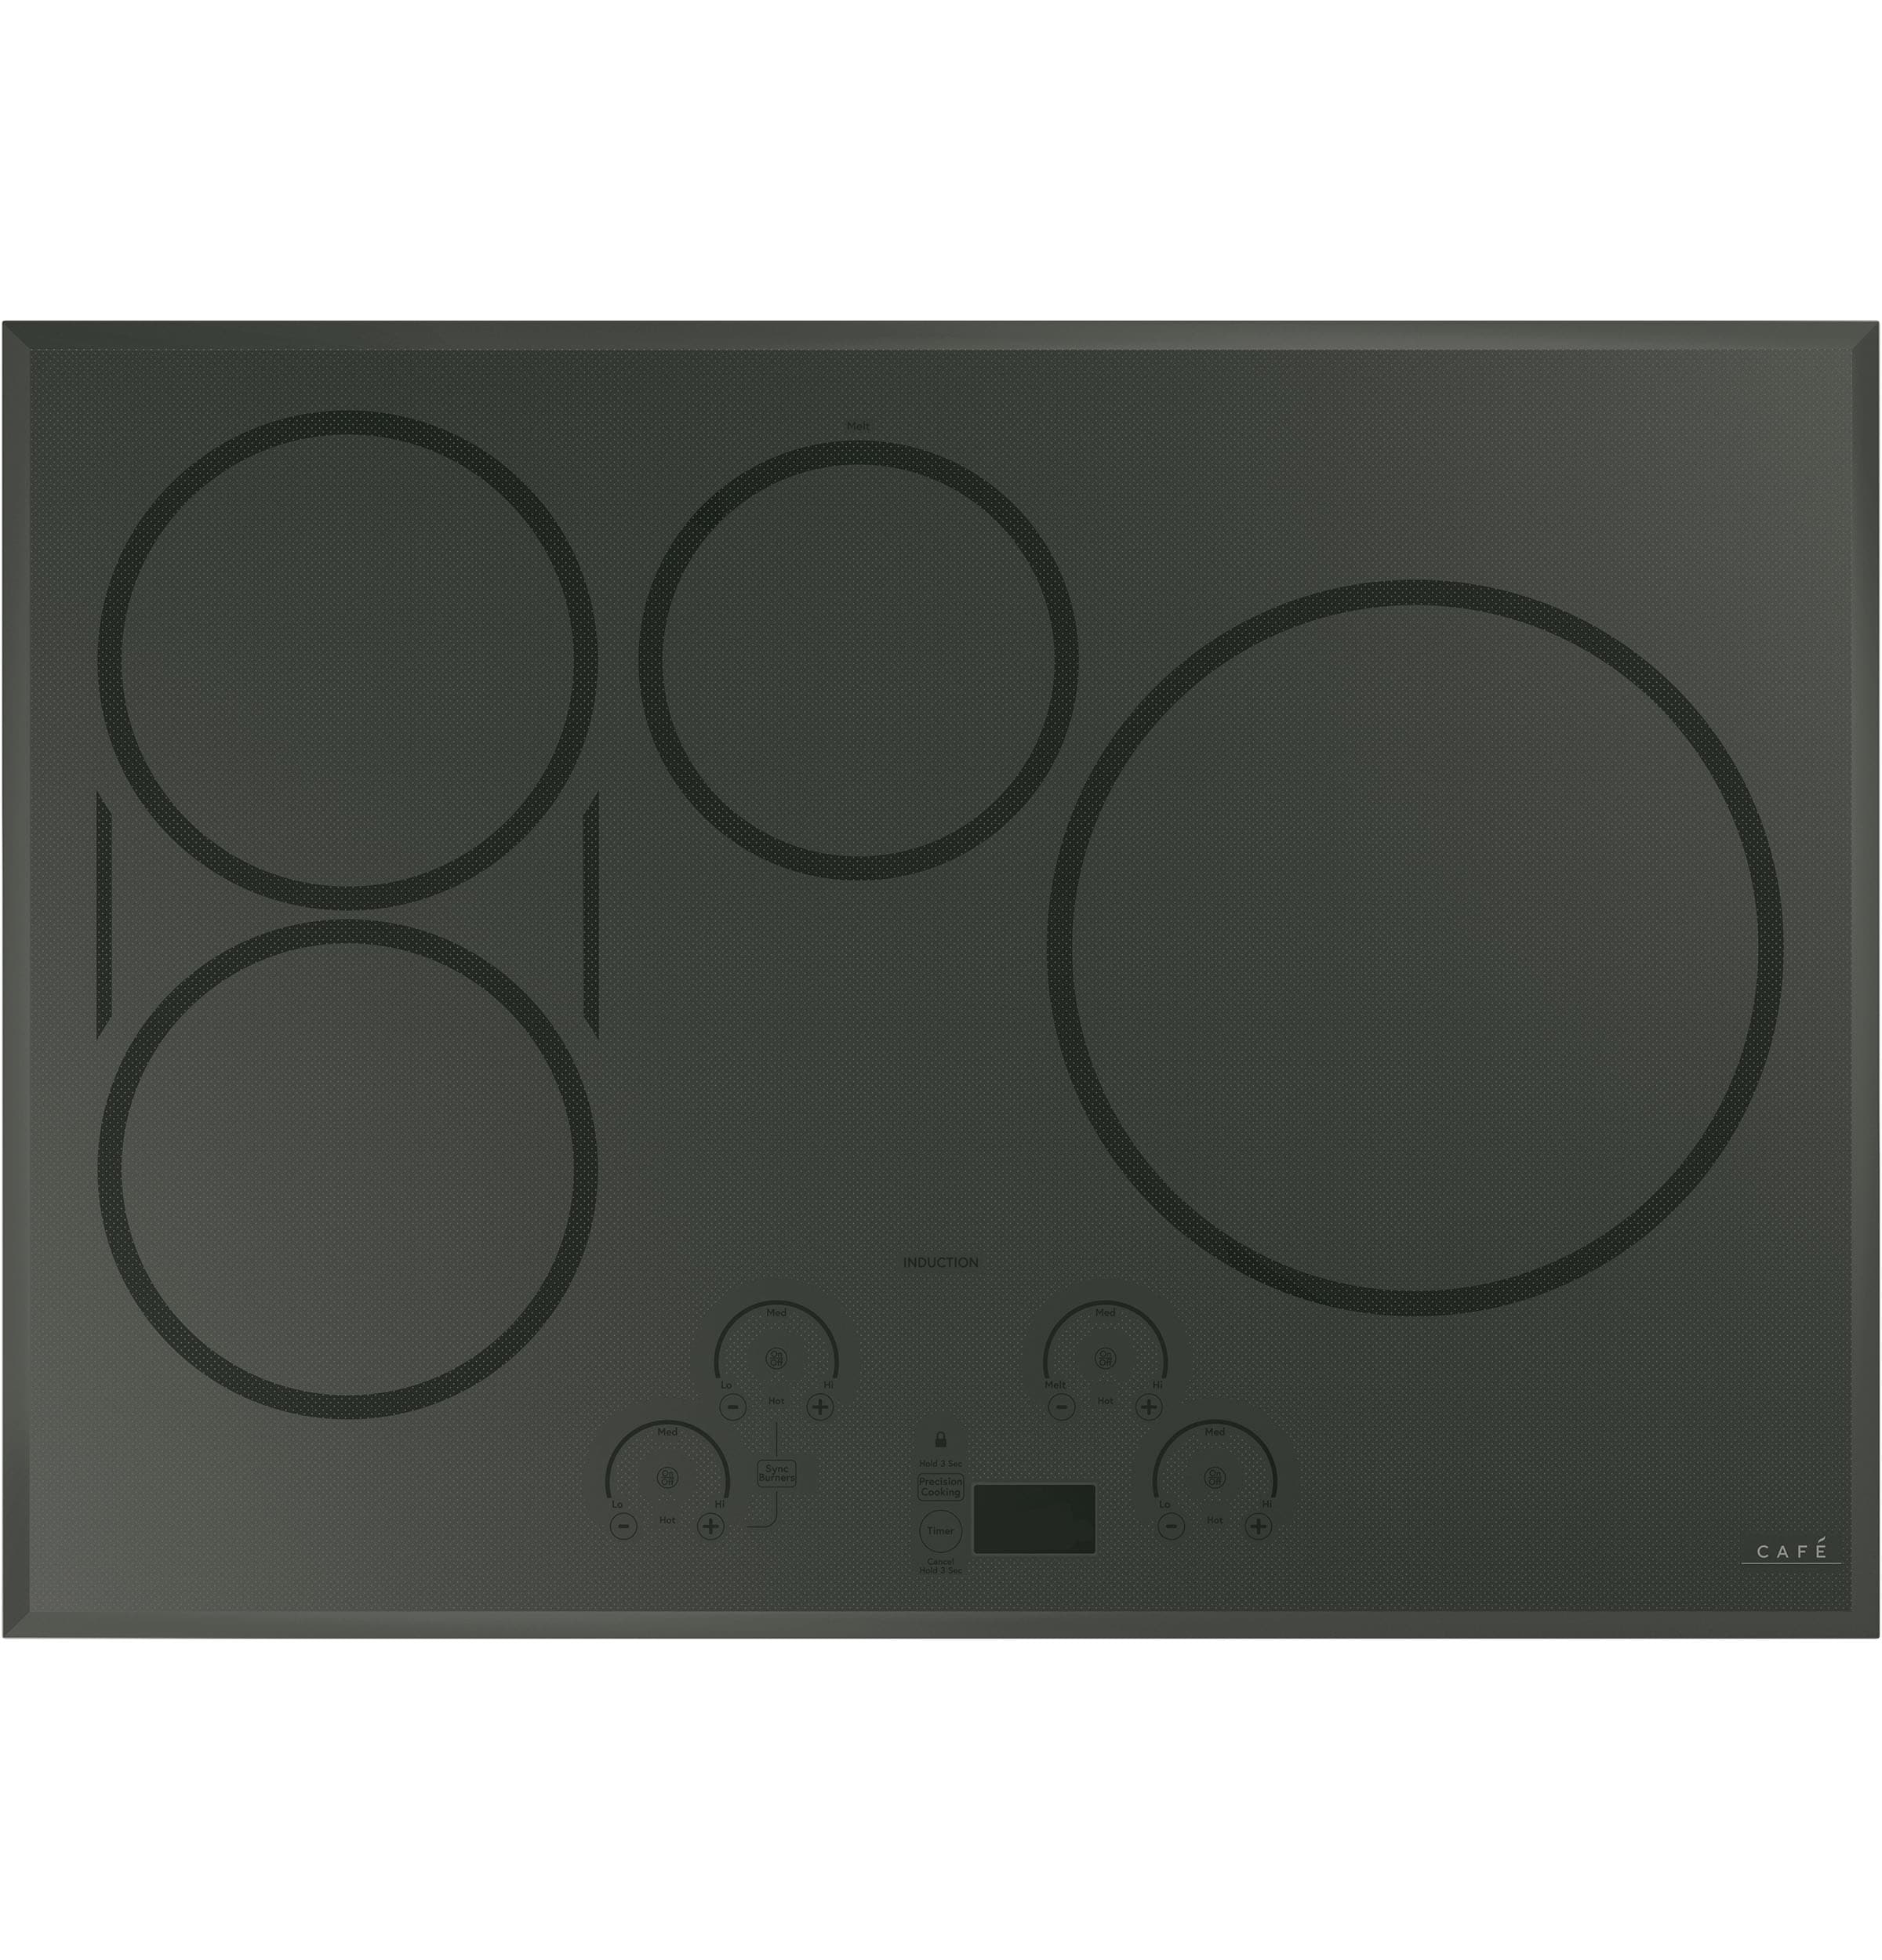 Café™ Series 30 Built-In Touch Control Induction Cooktop